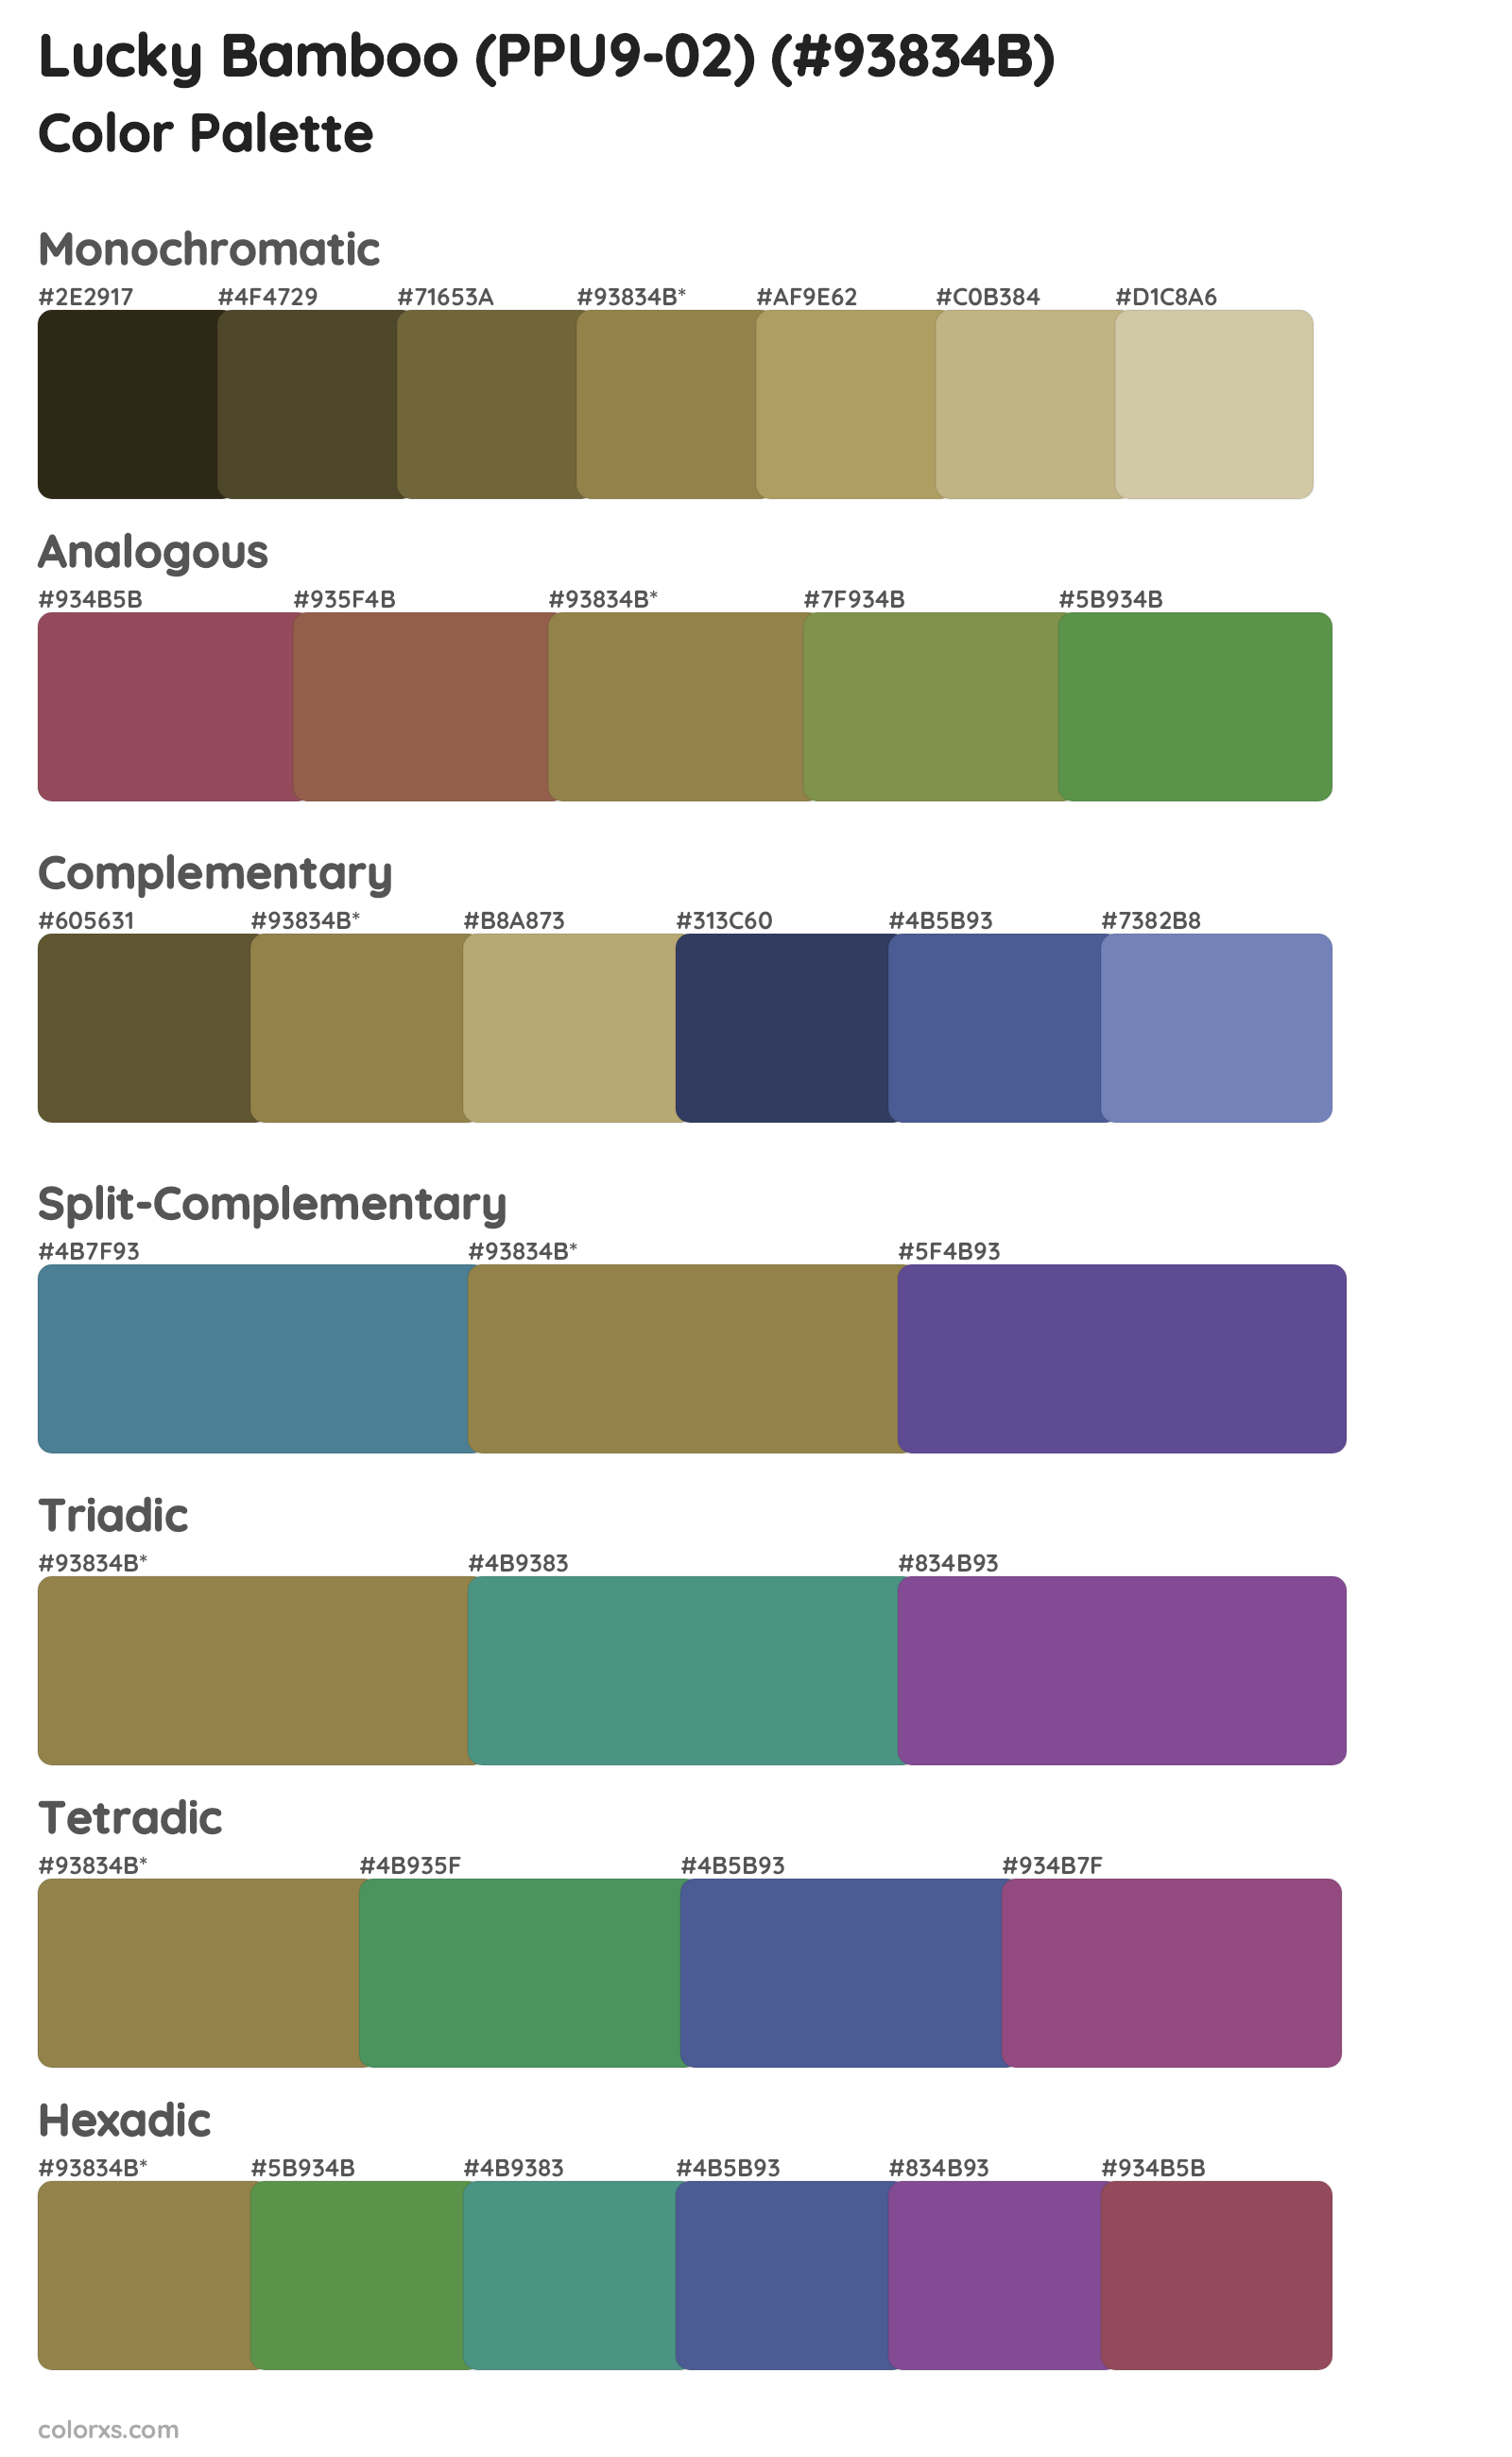 Lucky Bamboo (PPU9-02) Color Scheme Palettes